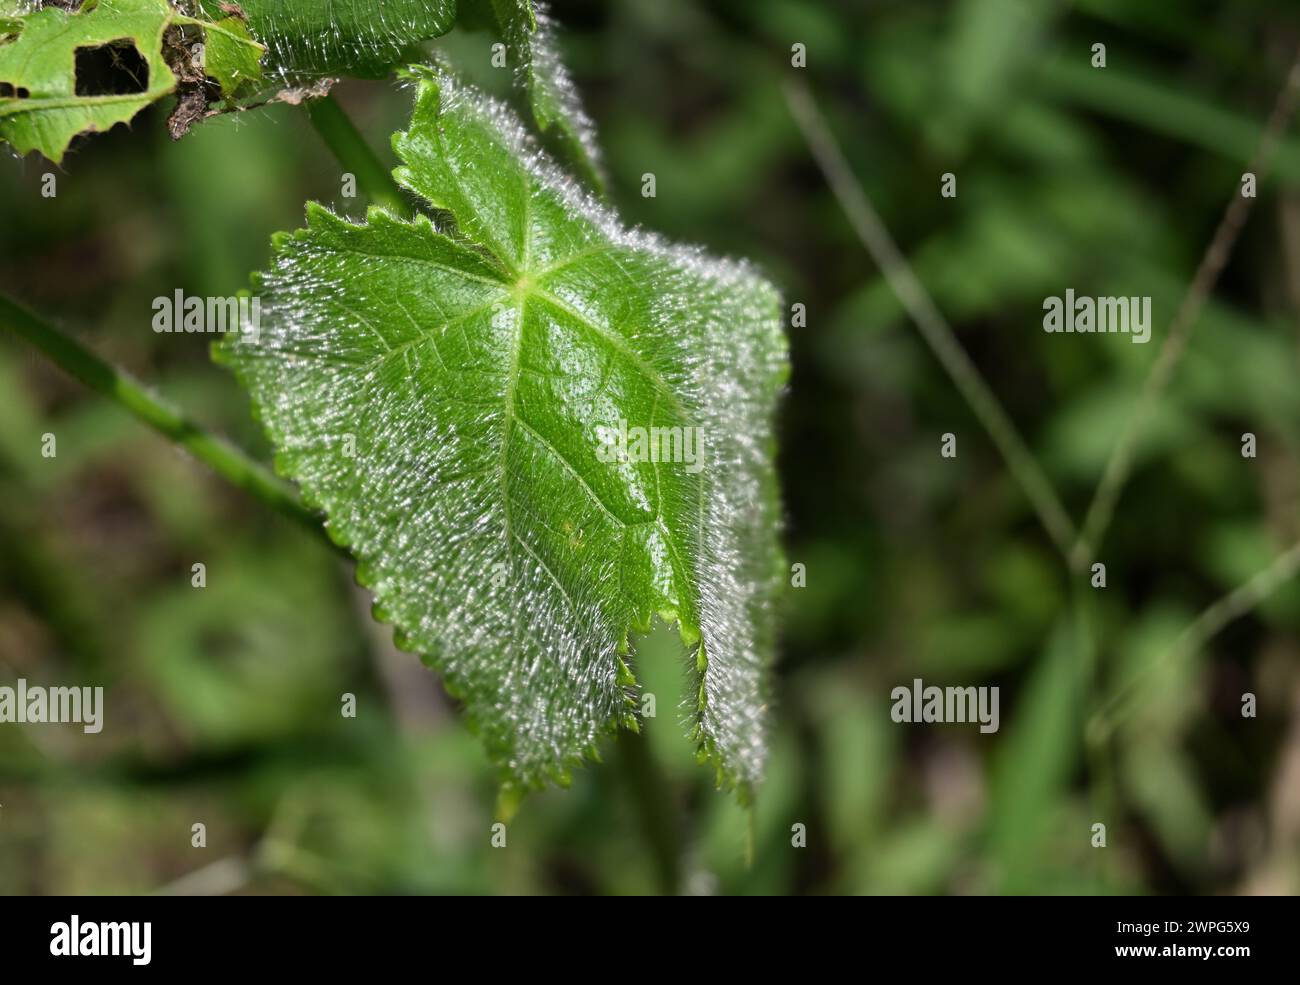 A fresh hairy leaf of a musk mallow (Abelmoschus moschatus) plant is glittering due to exposure to sunlight Stock Photo